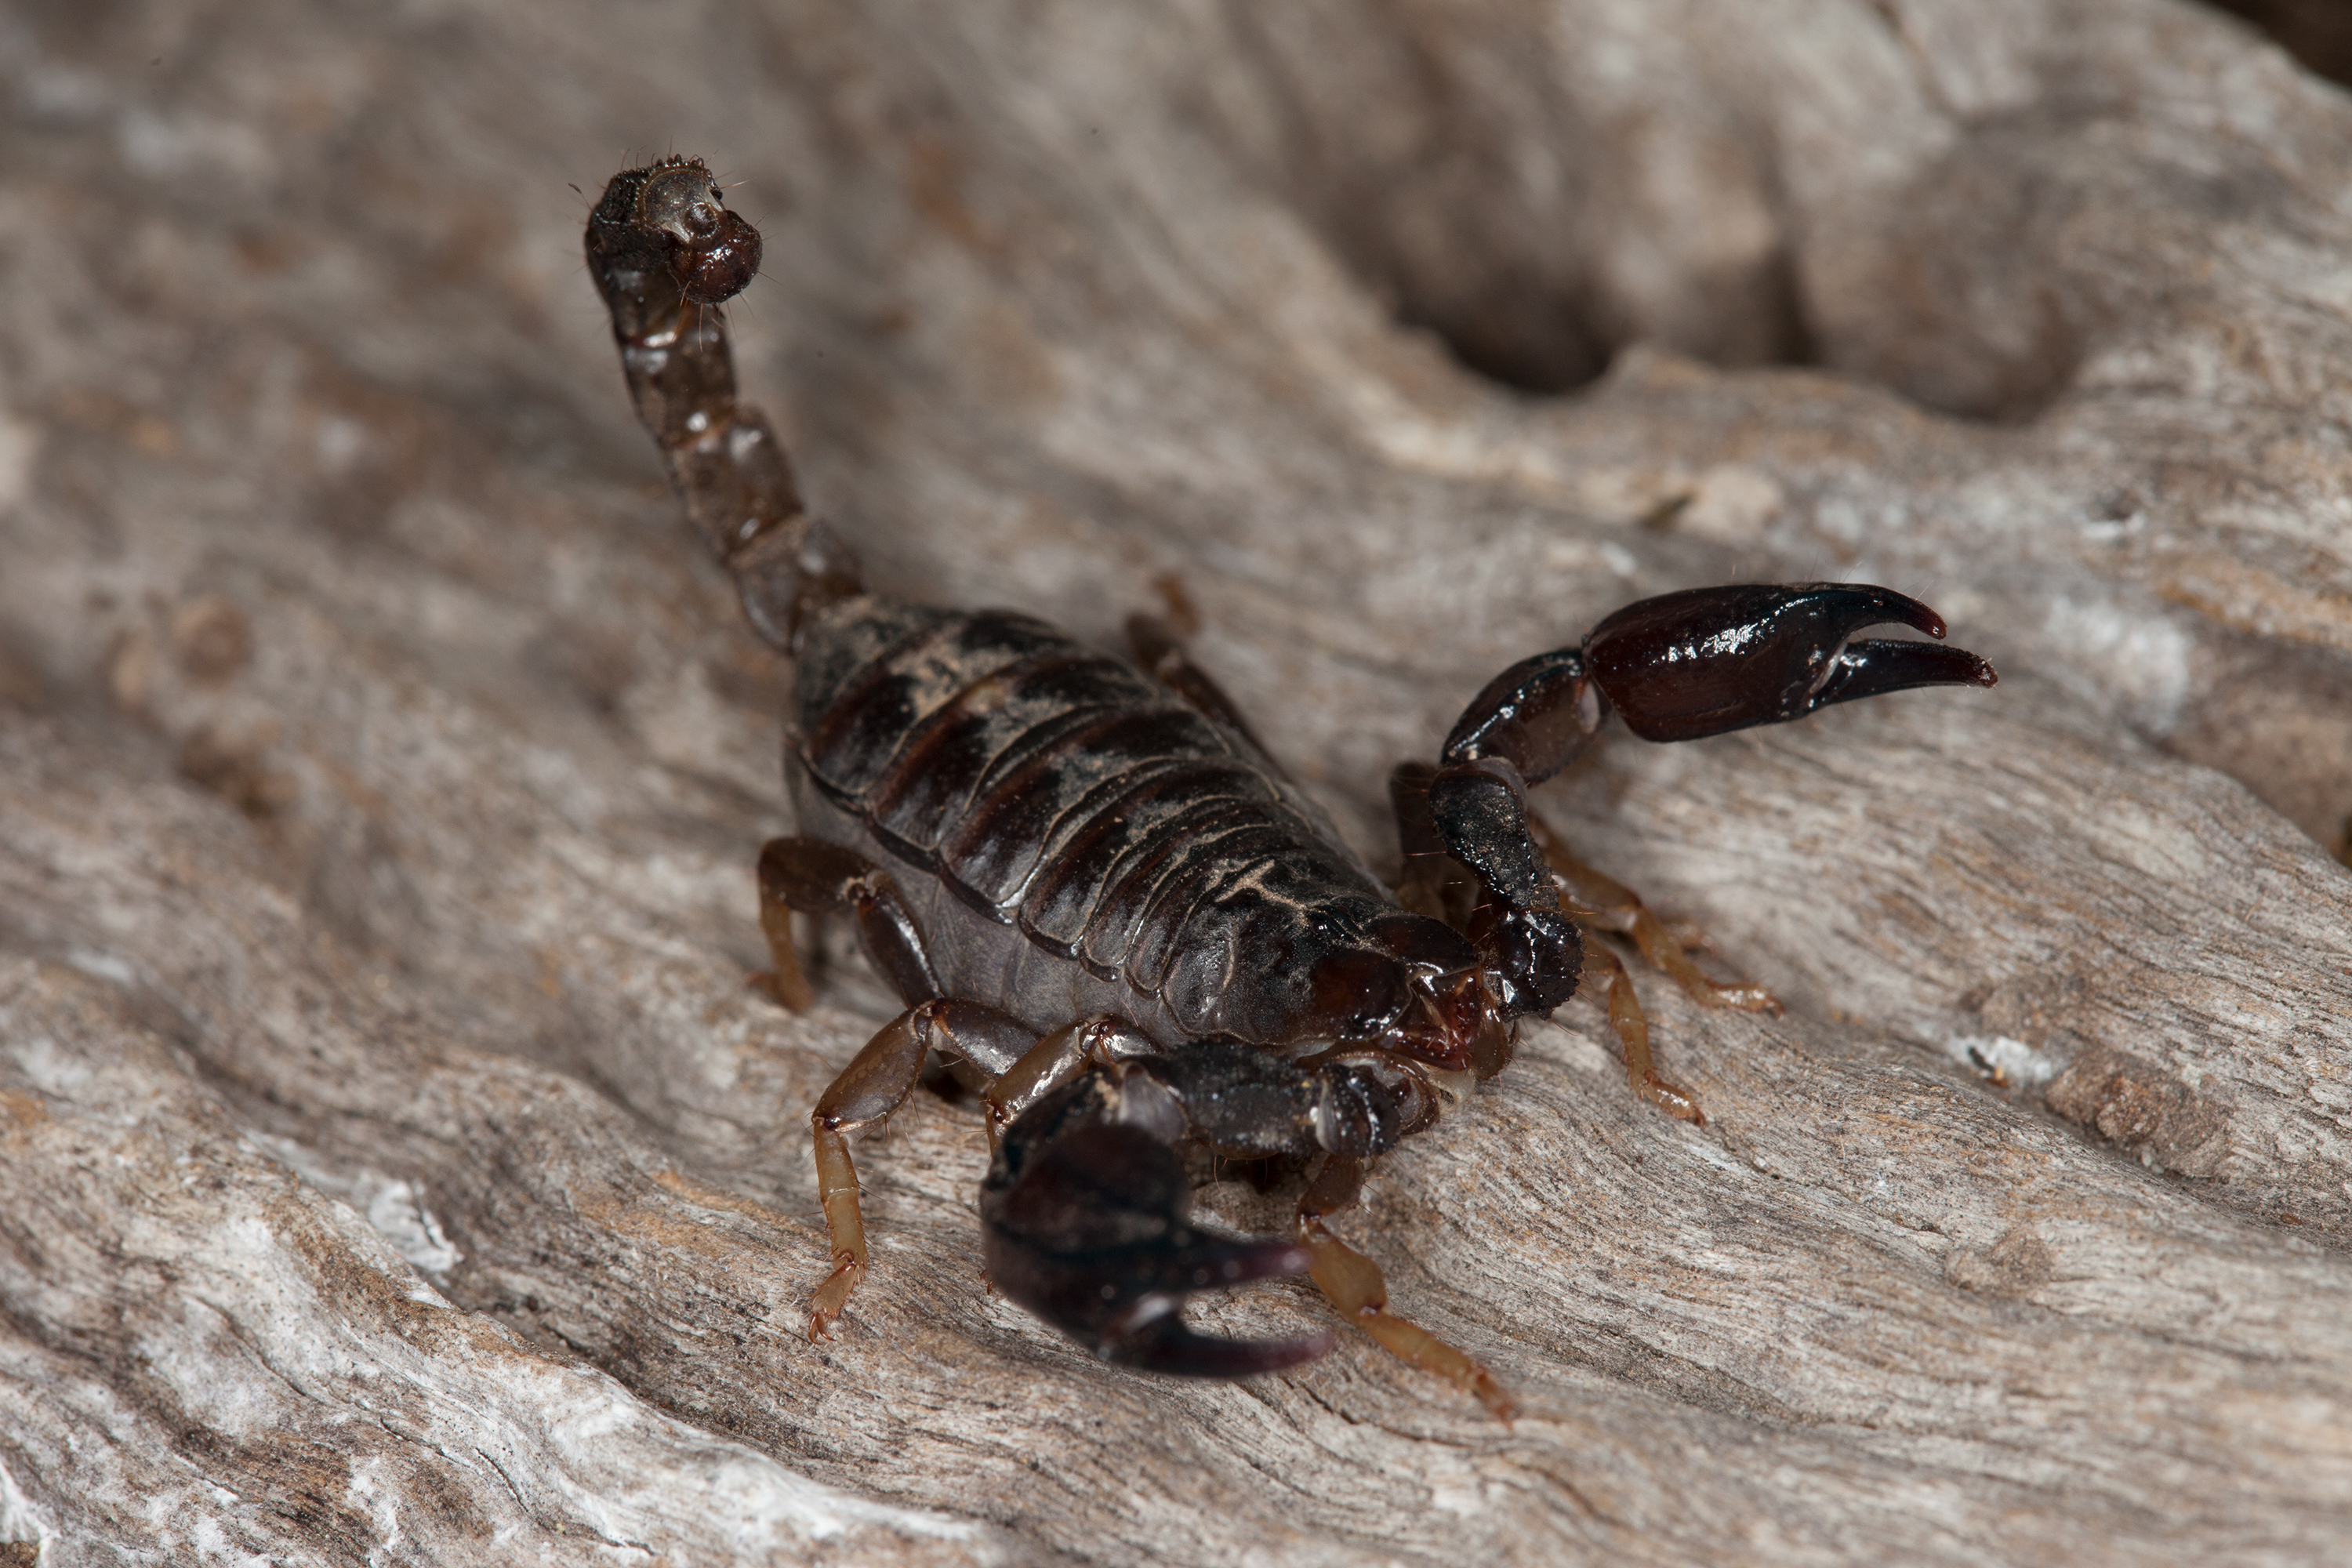 Scorpion facts and fallacies - Museums Victoria